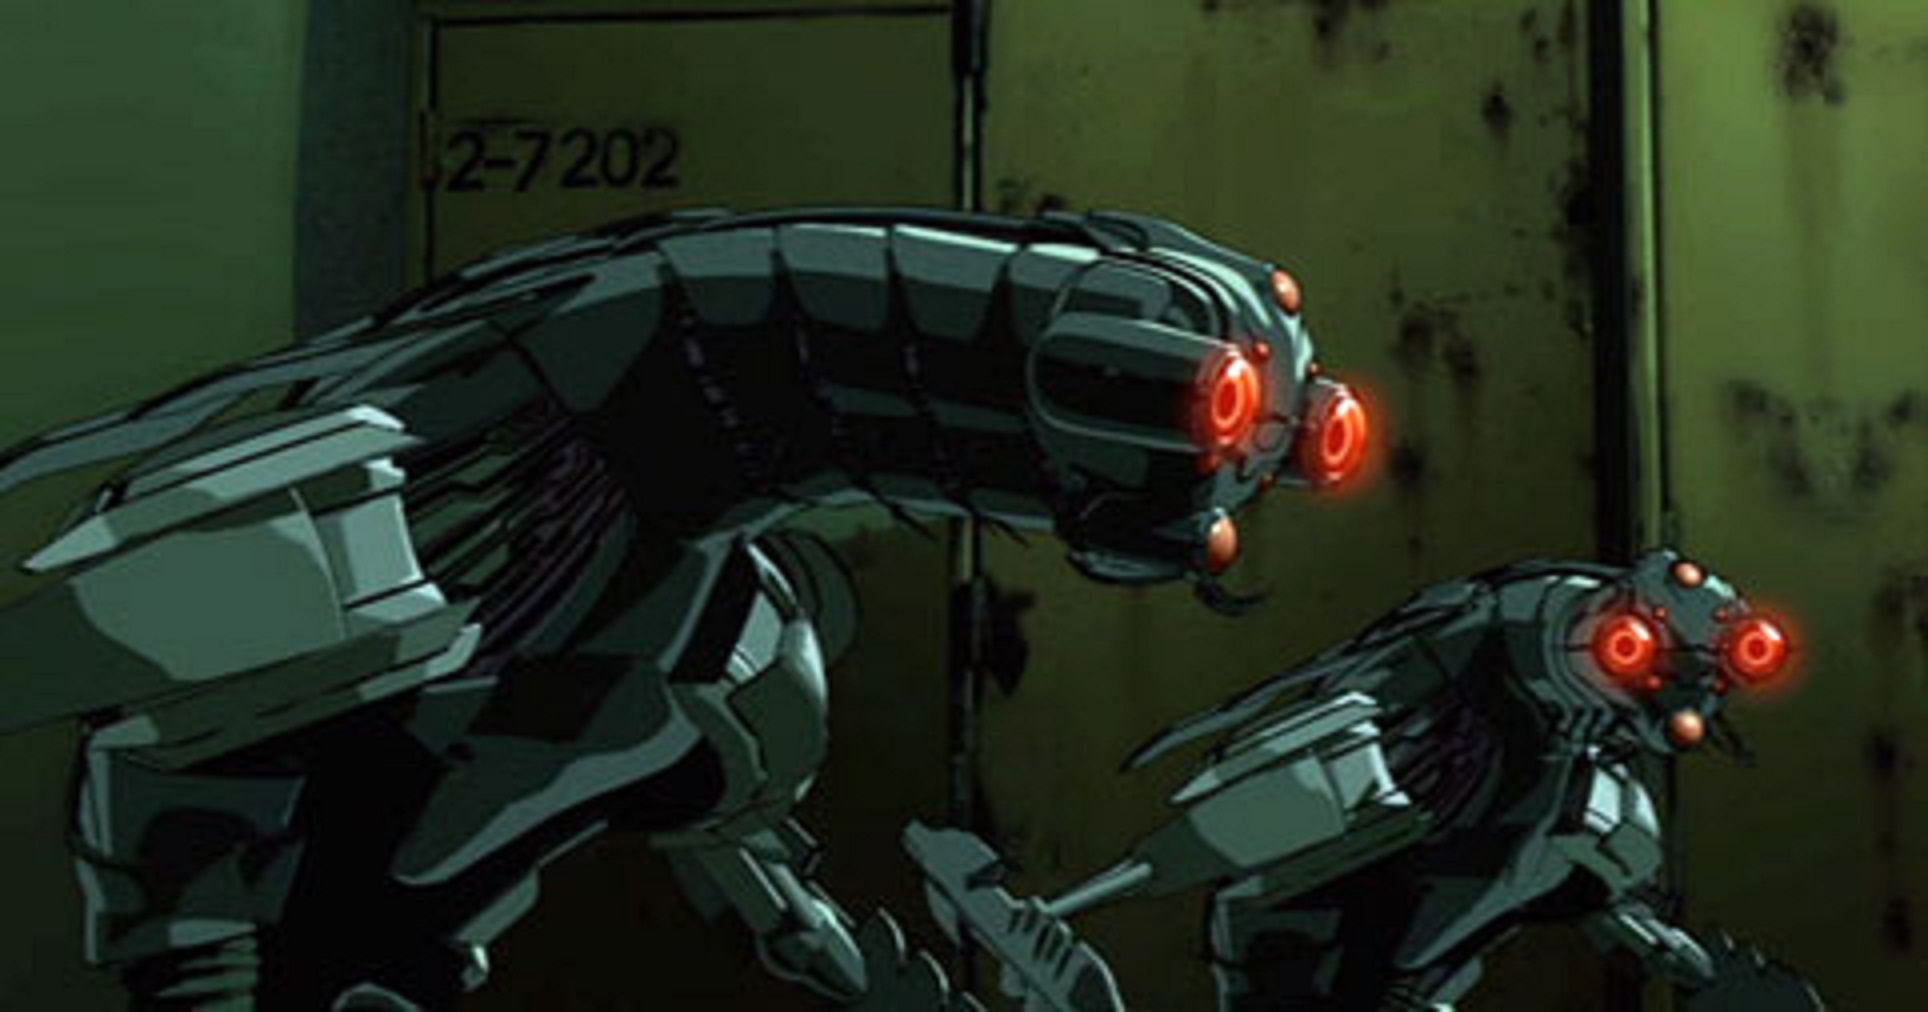 Two machines with red glowing eyes walk along a hallway in The Animatrix